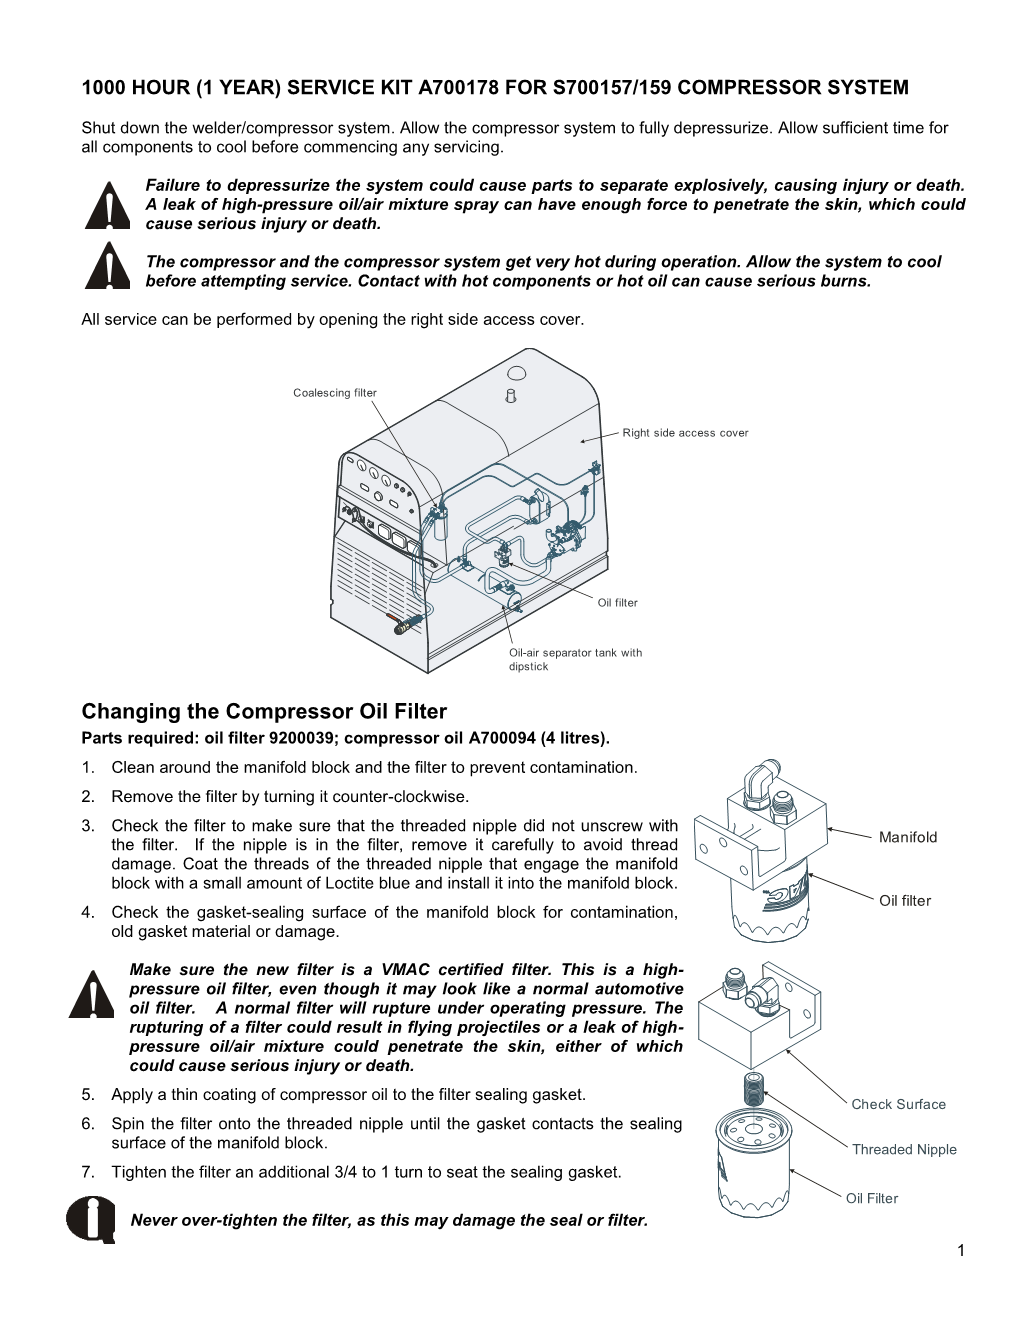 Changing the Compressor Oil Filter Parts Required: Oil Filter 9200039; Compressor Oil A700094 (4 Litres)